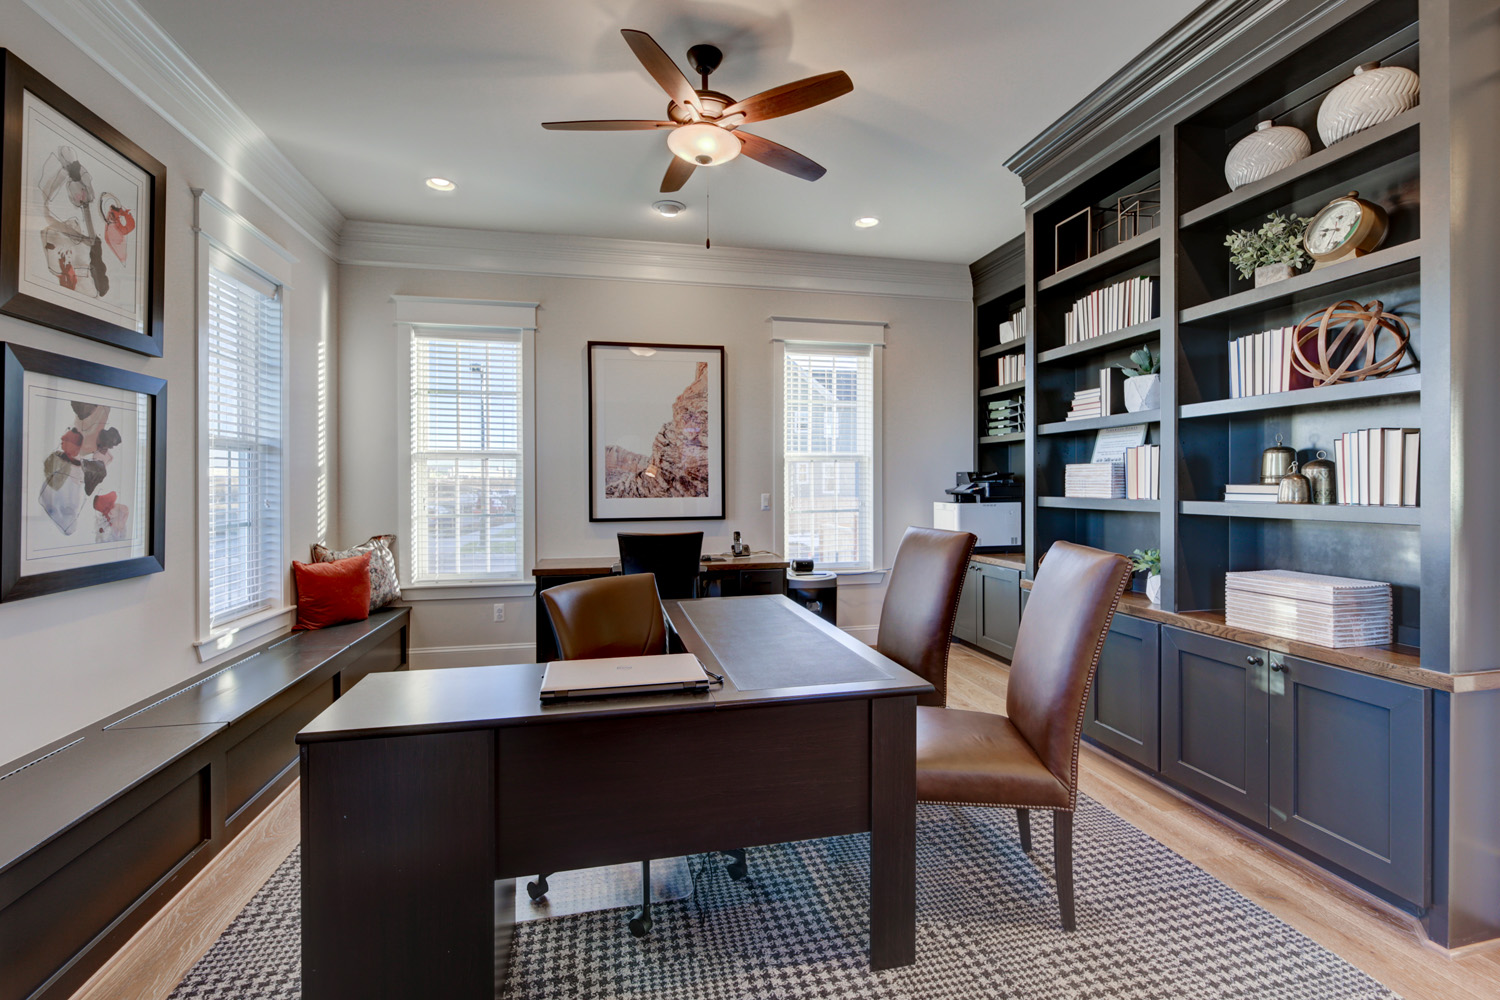 “Small Space Solutions: Designing a Functional Home Office in Limited Areas”